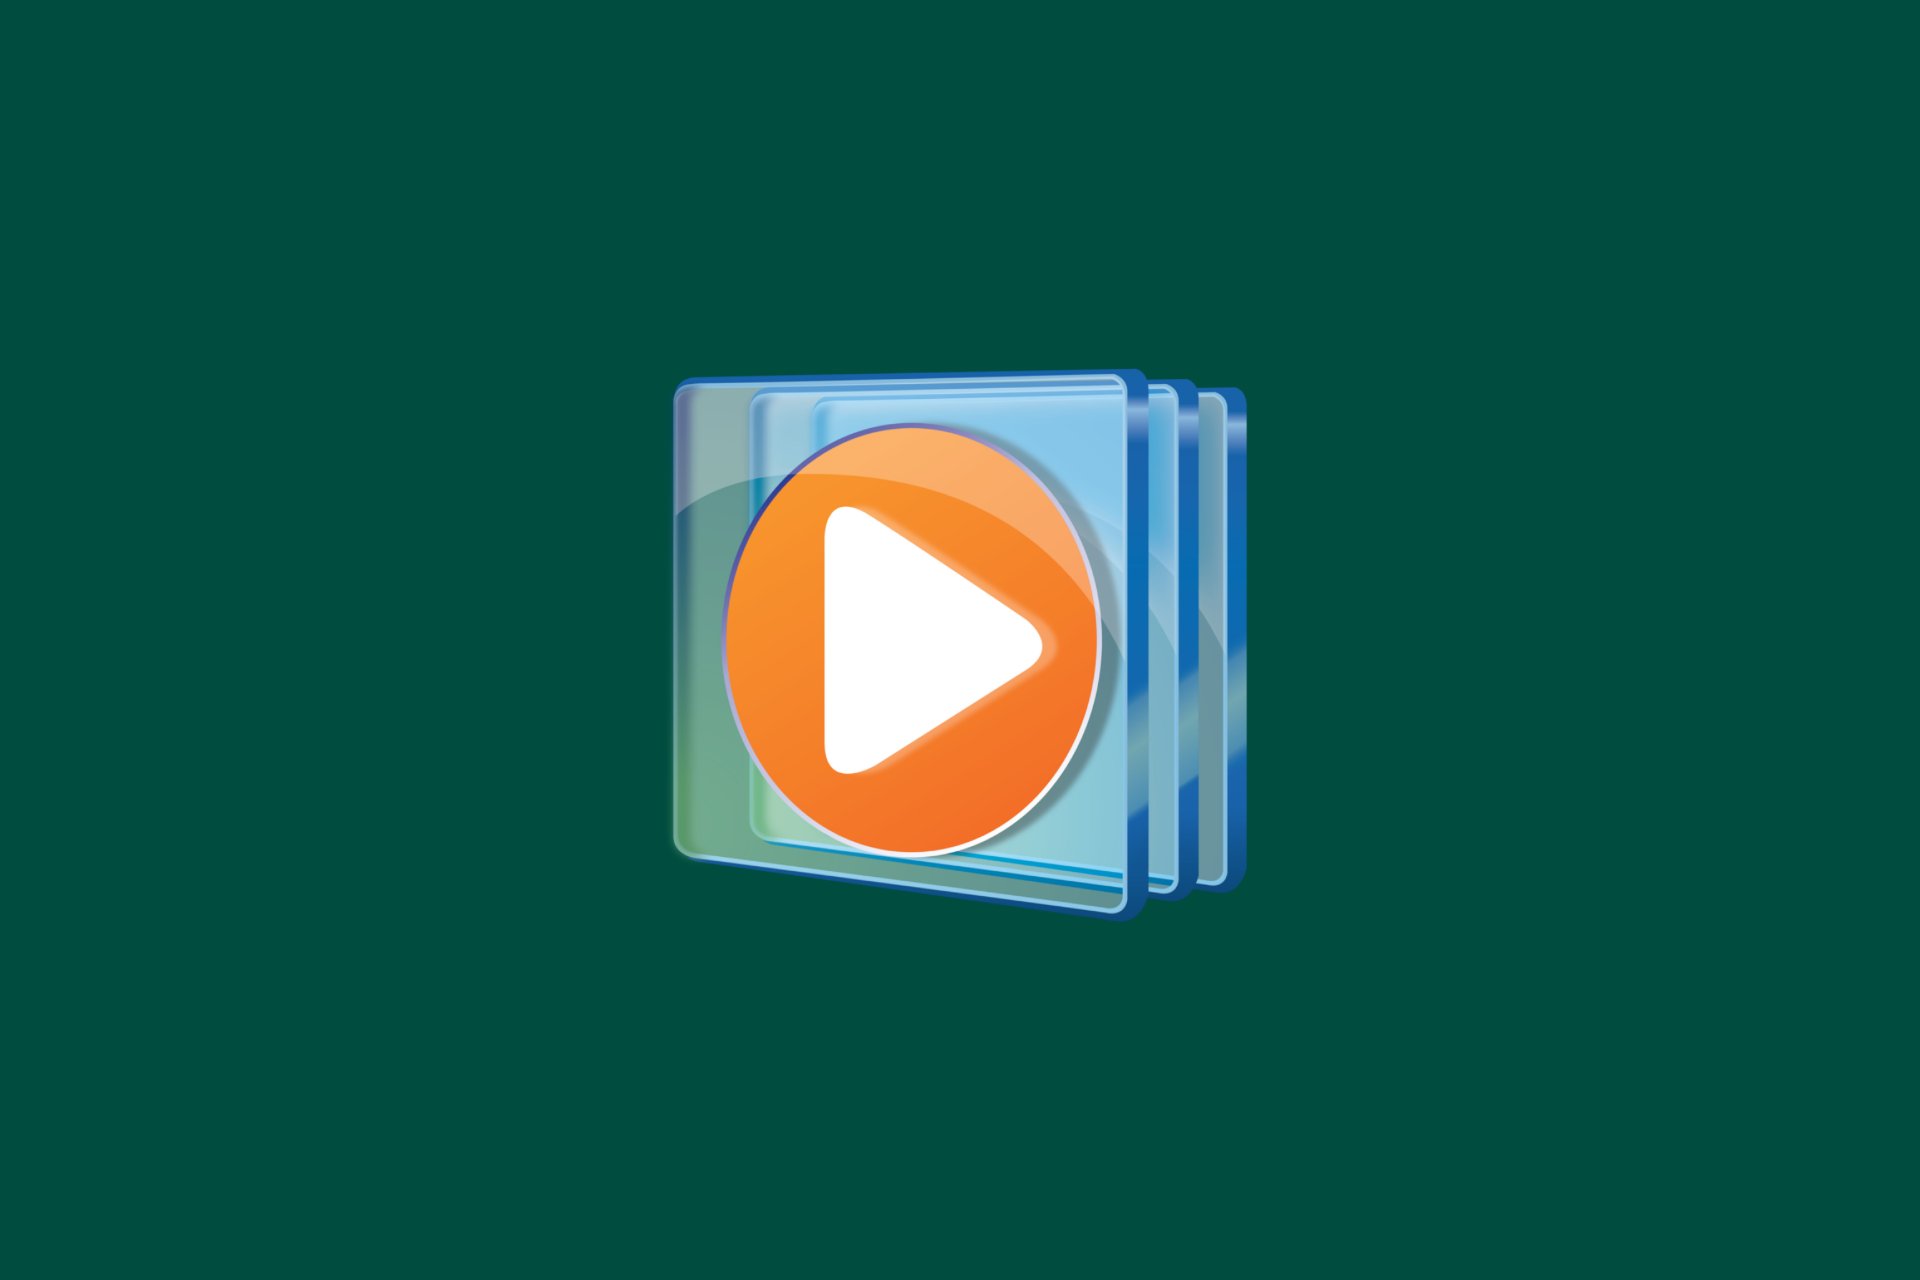 Windows Media Player cannot open audio and video files